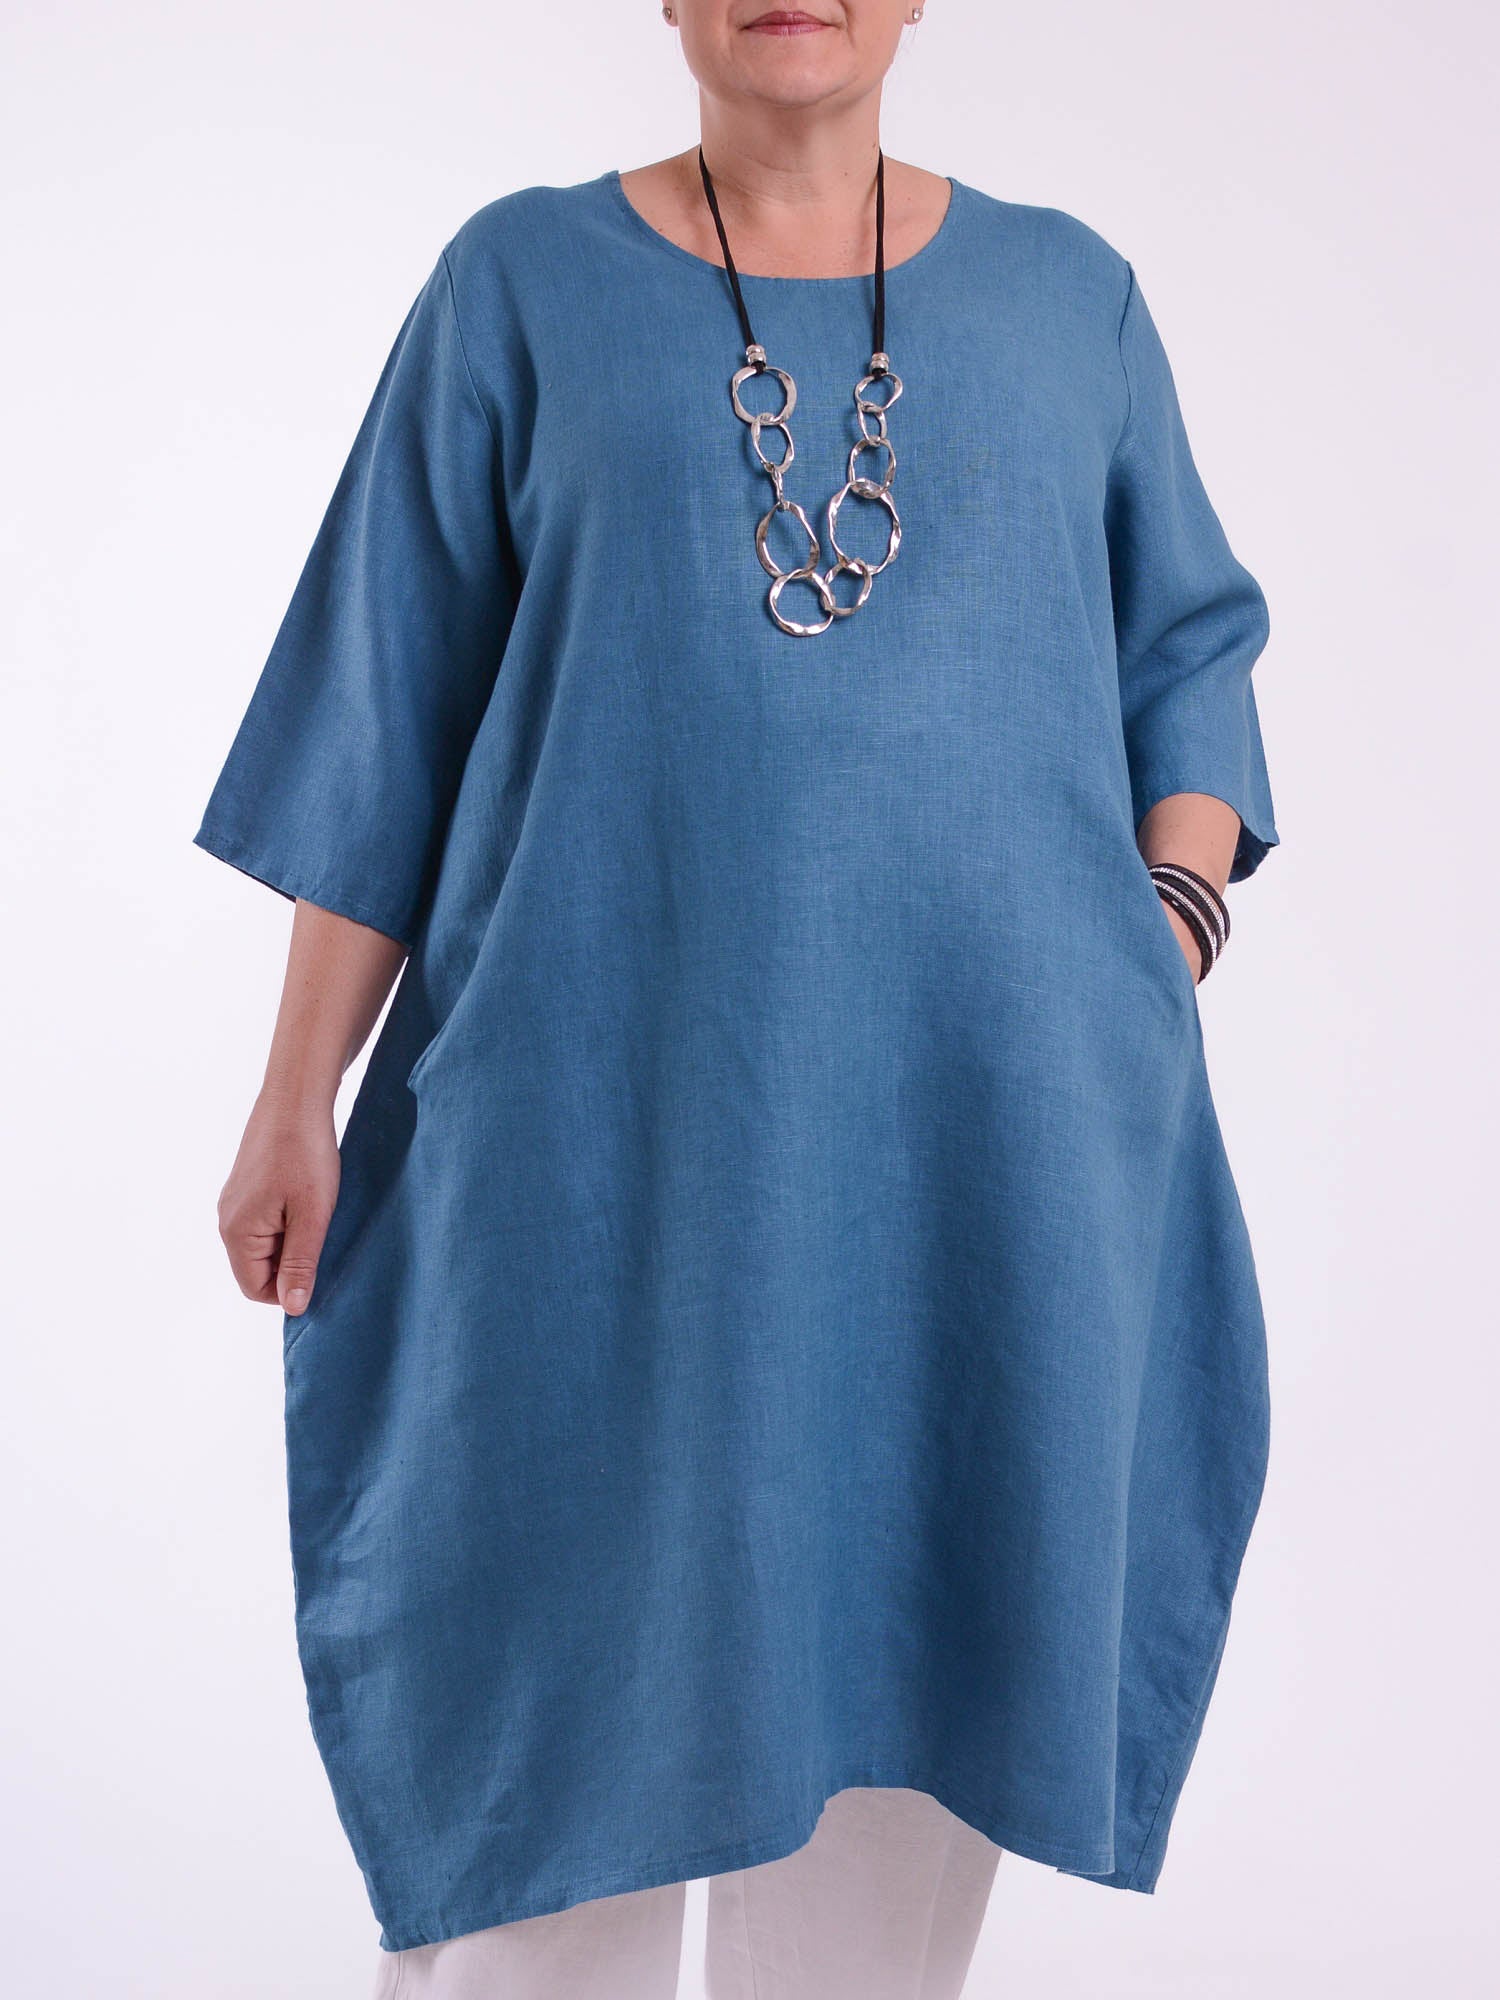 Lagenlook Basic Casual Tunic Dress - 9469 Linen, Dresses, Pure Plus Clothing, Lagenlook Clothing, Plus Size Fashion, Over 50 Fashion